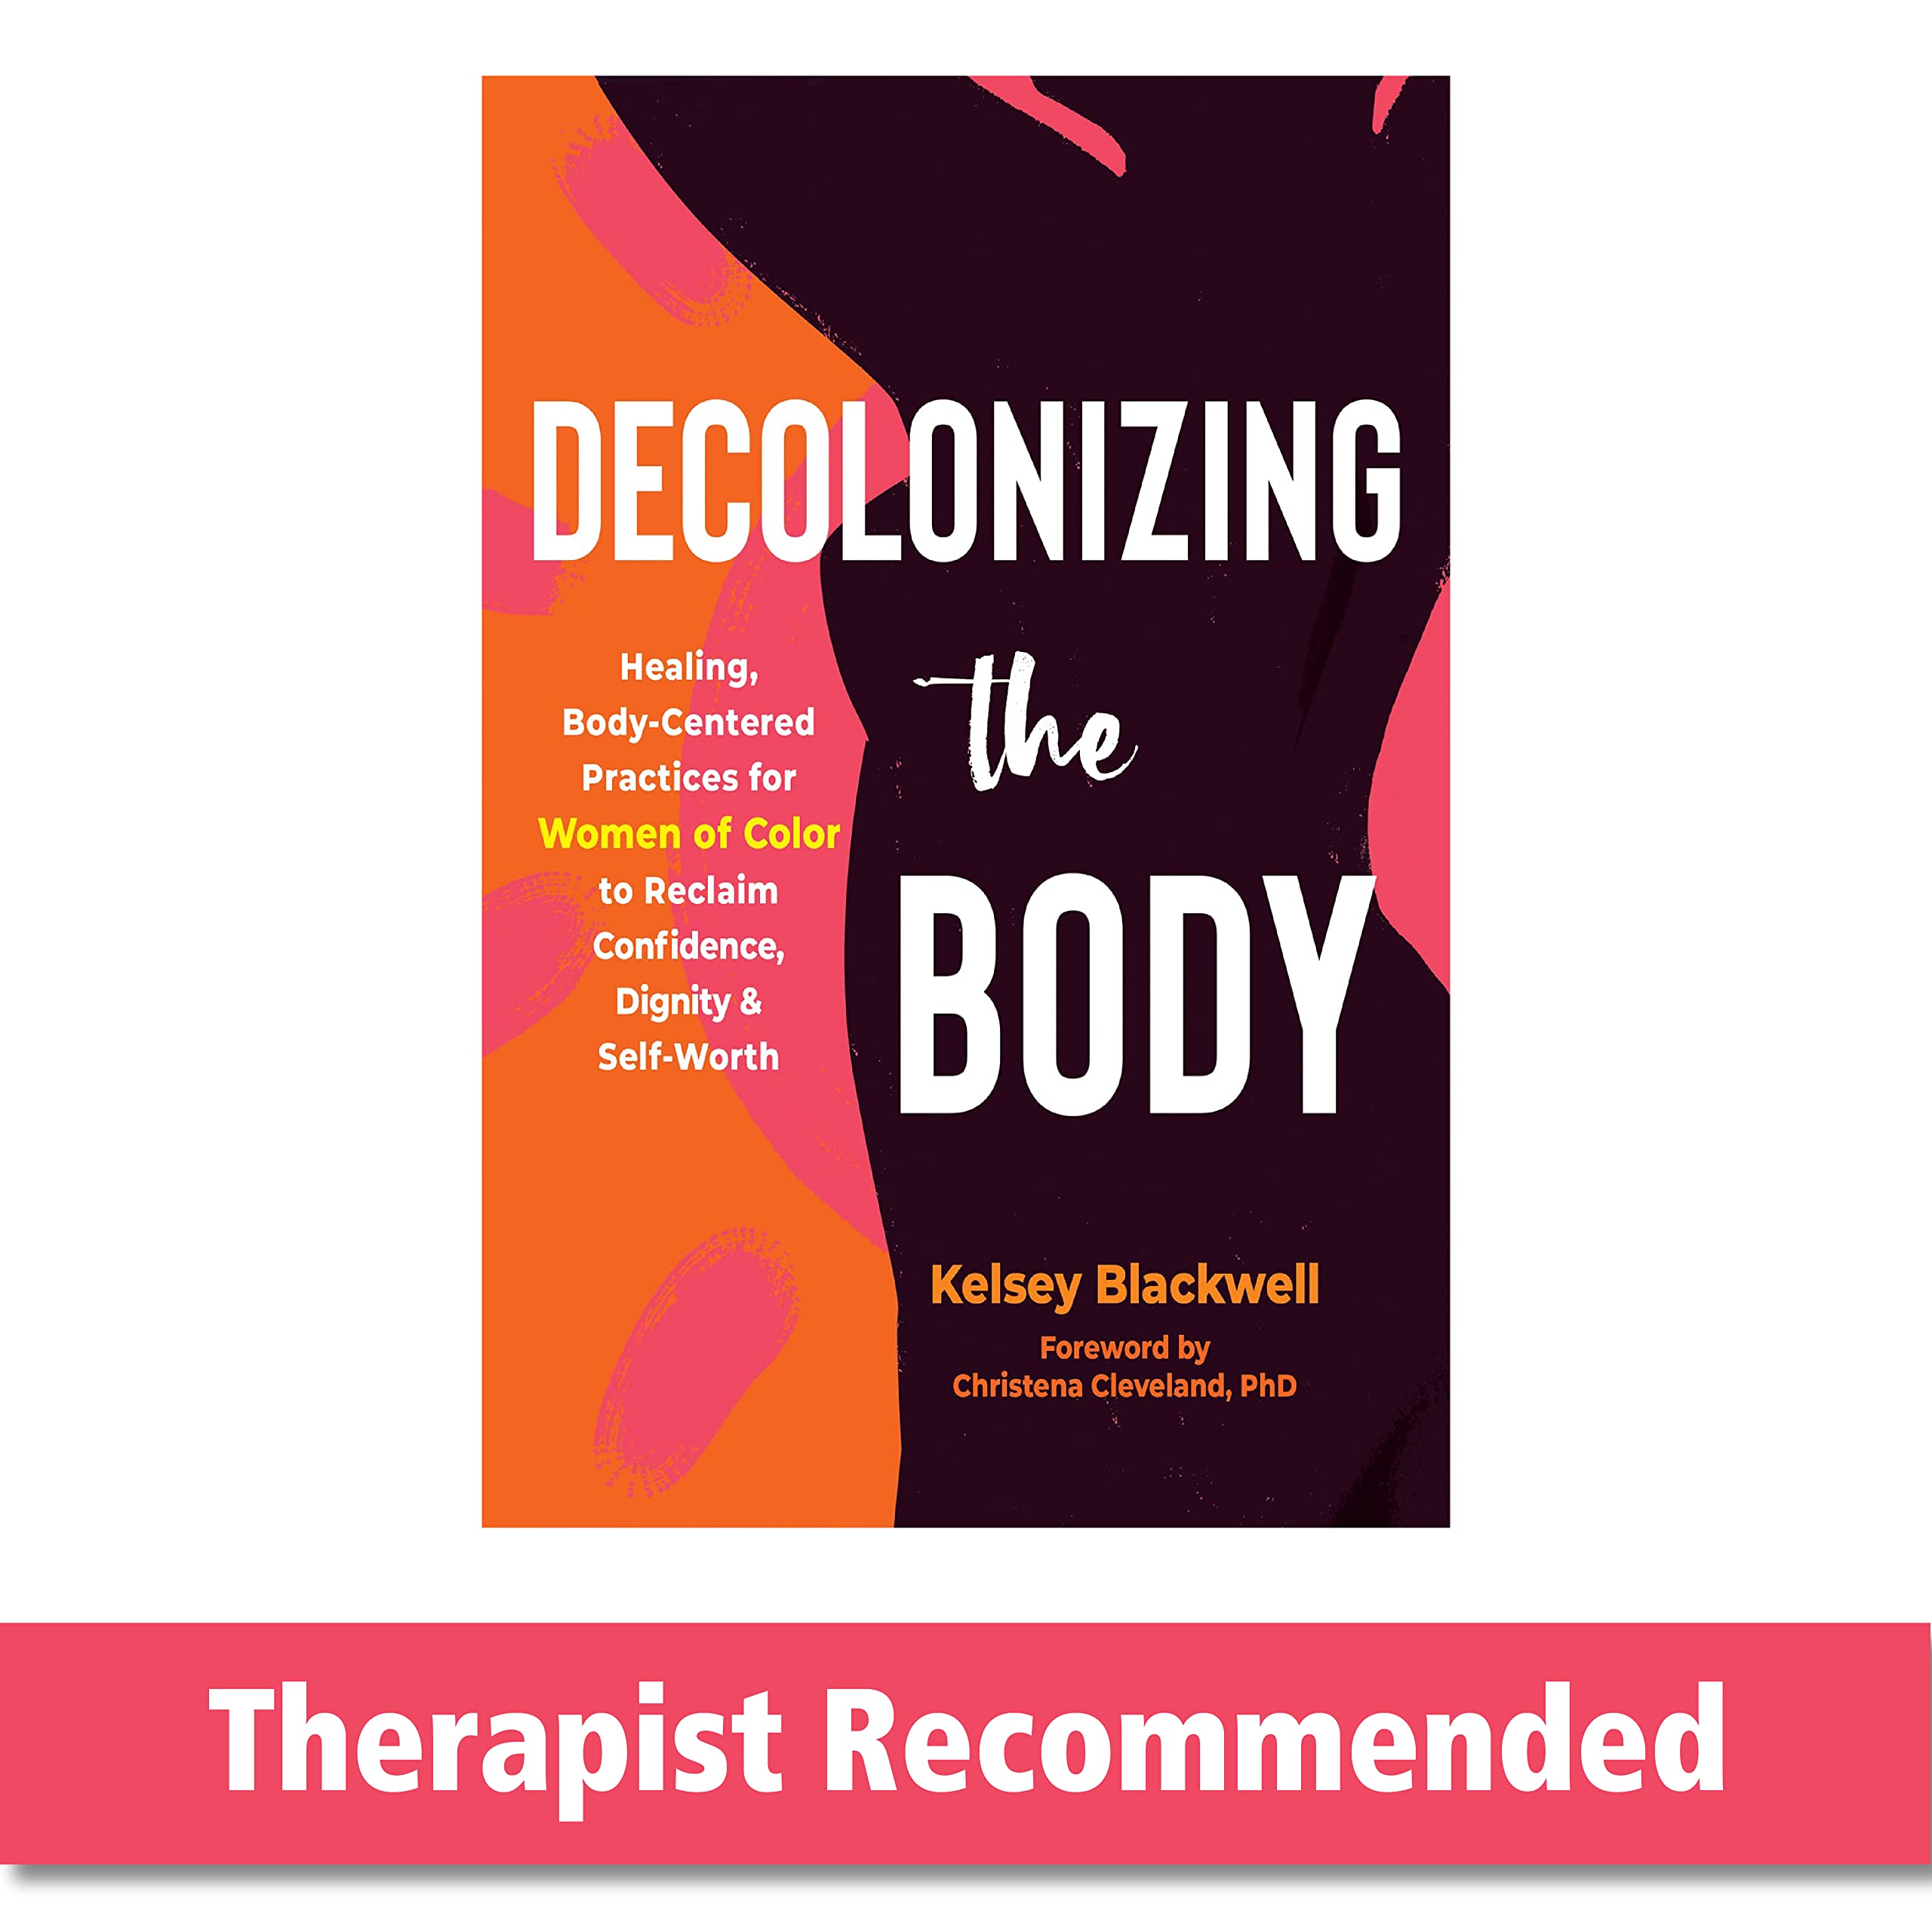 Decolonizing the Body: Healing, Body-Centered Practices for Women of Color to Reclaim Confidence, Dignity, and Self-Worth Paperback